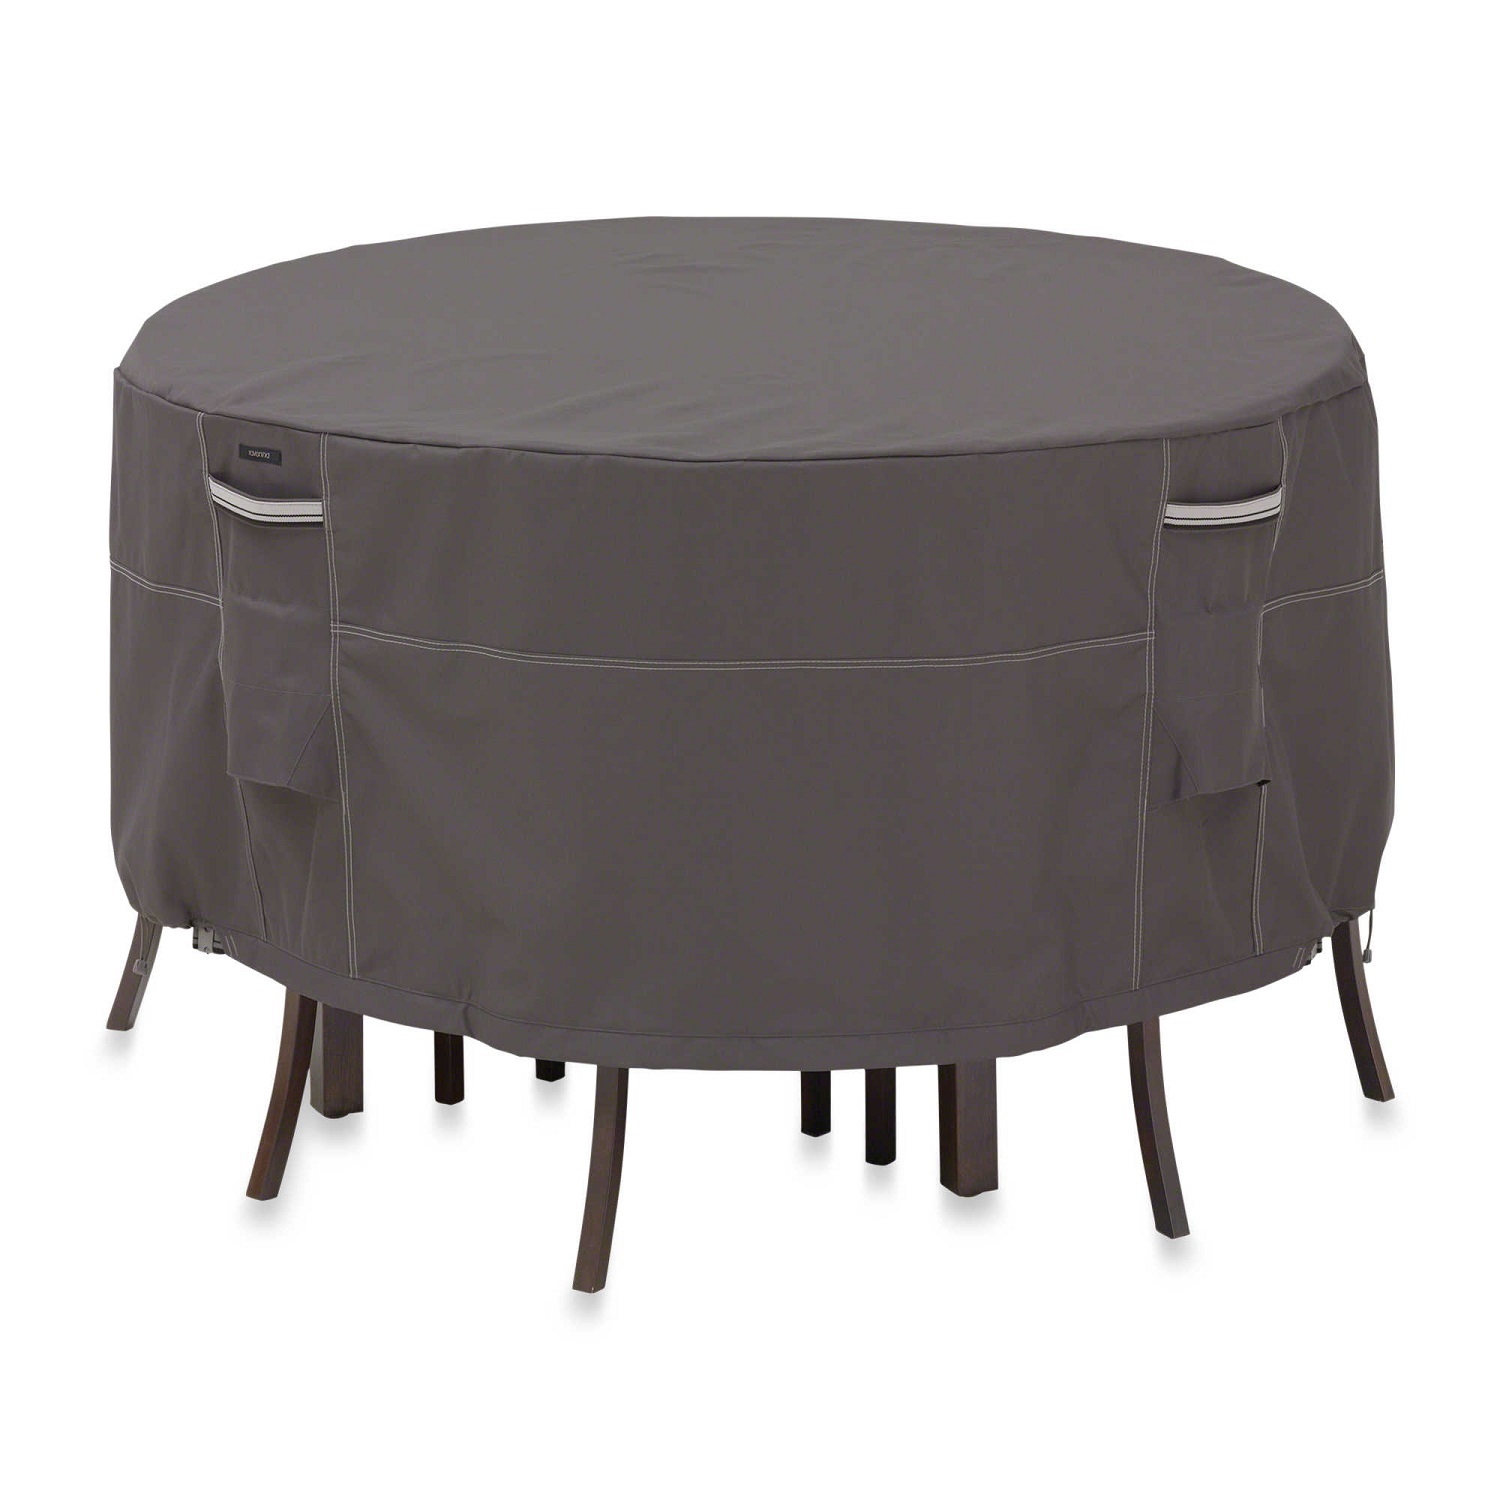 Classic Accessories Ravenna Patio Table & Chair Set Cover-Rectangle\/Oval Large